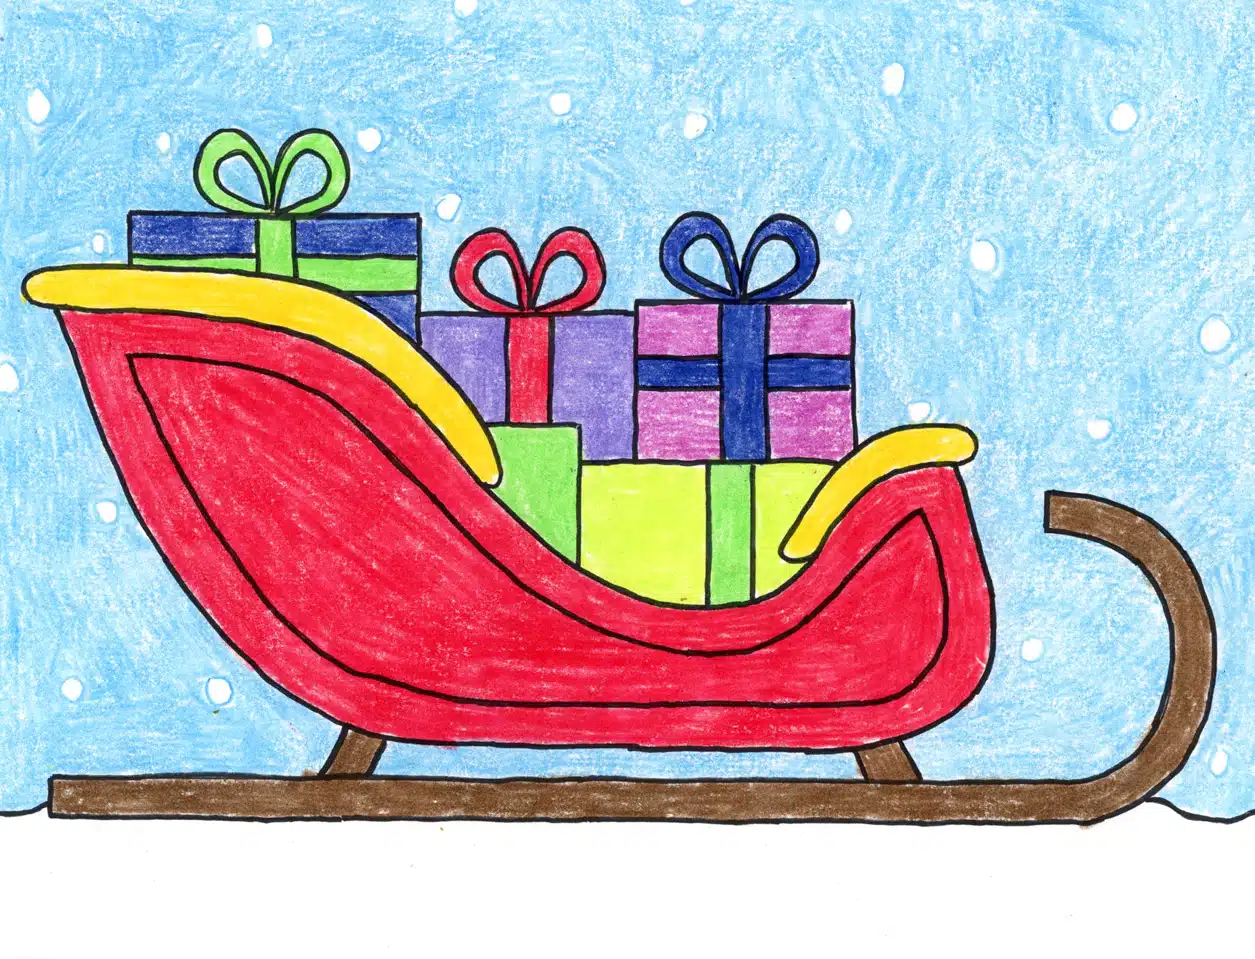 Easy How to Draw Santa’s Sleigh Tutorial Video and Coloring Page